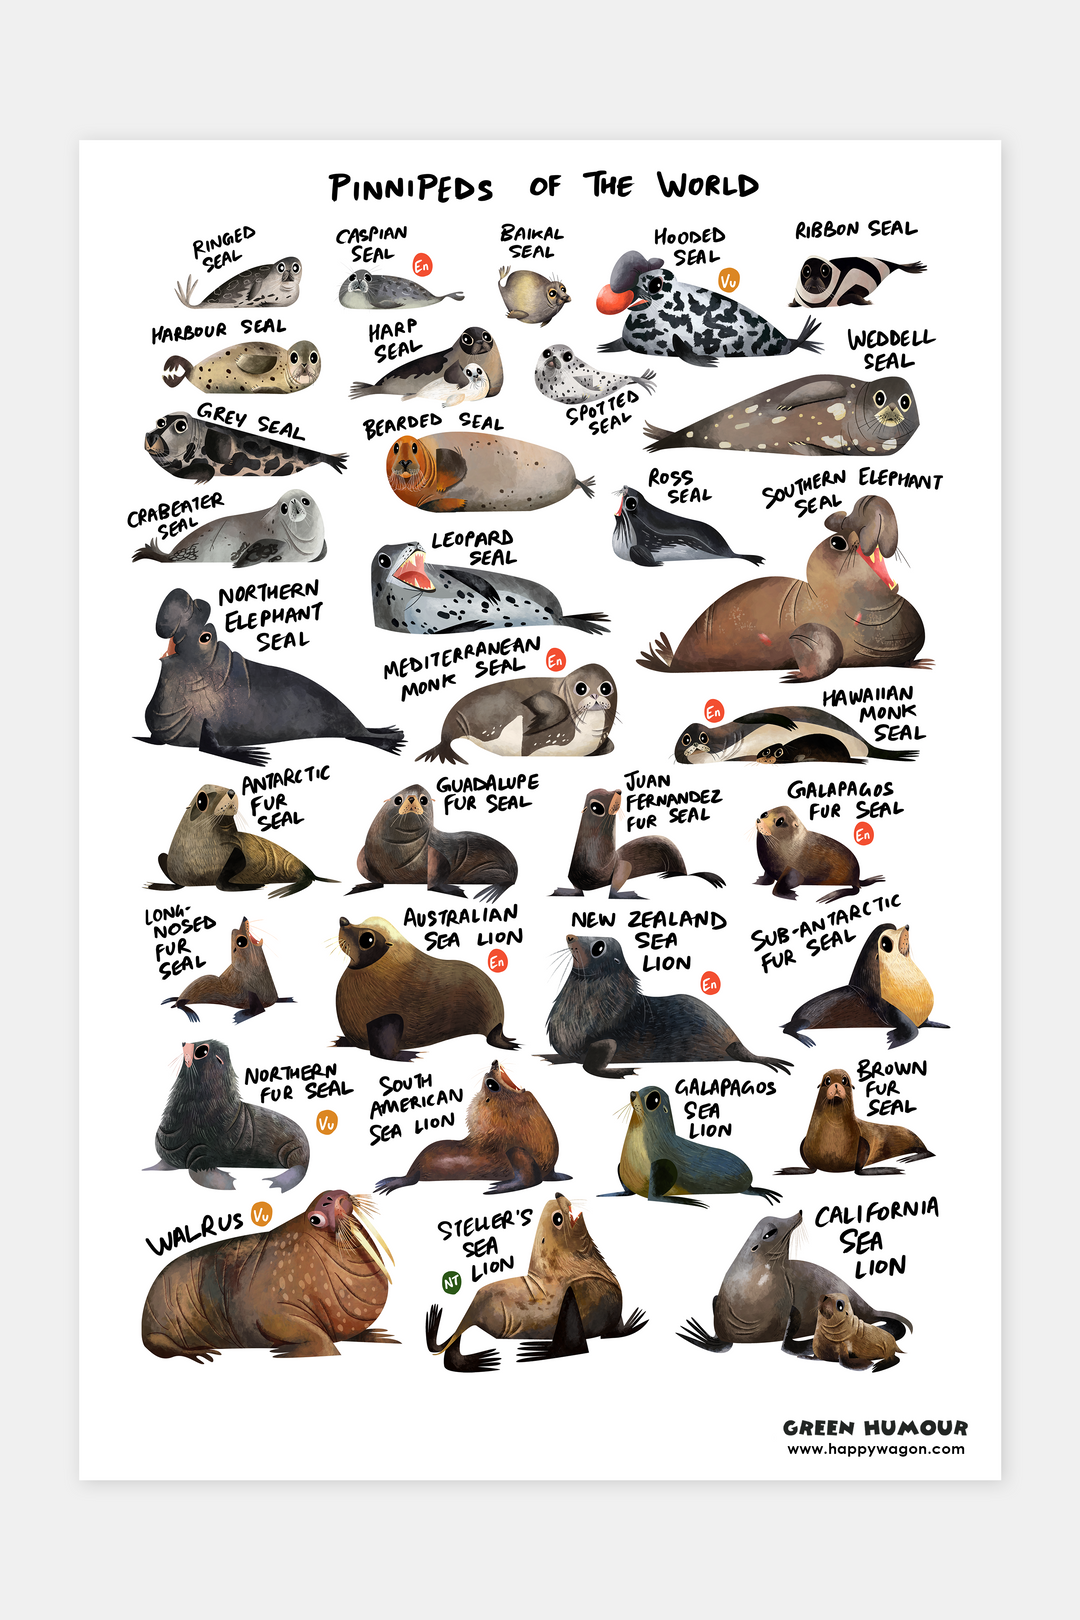 Seals Of The World (Pinnipeds) Non-Tearable Poster